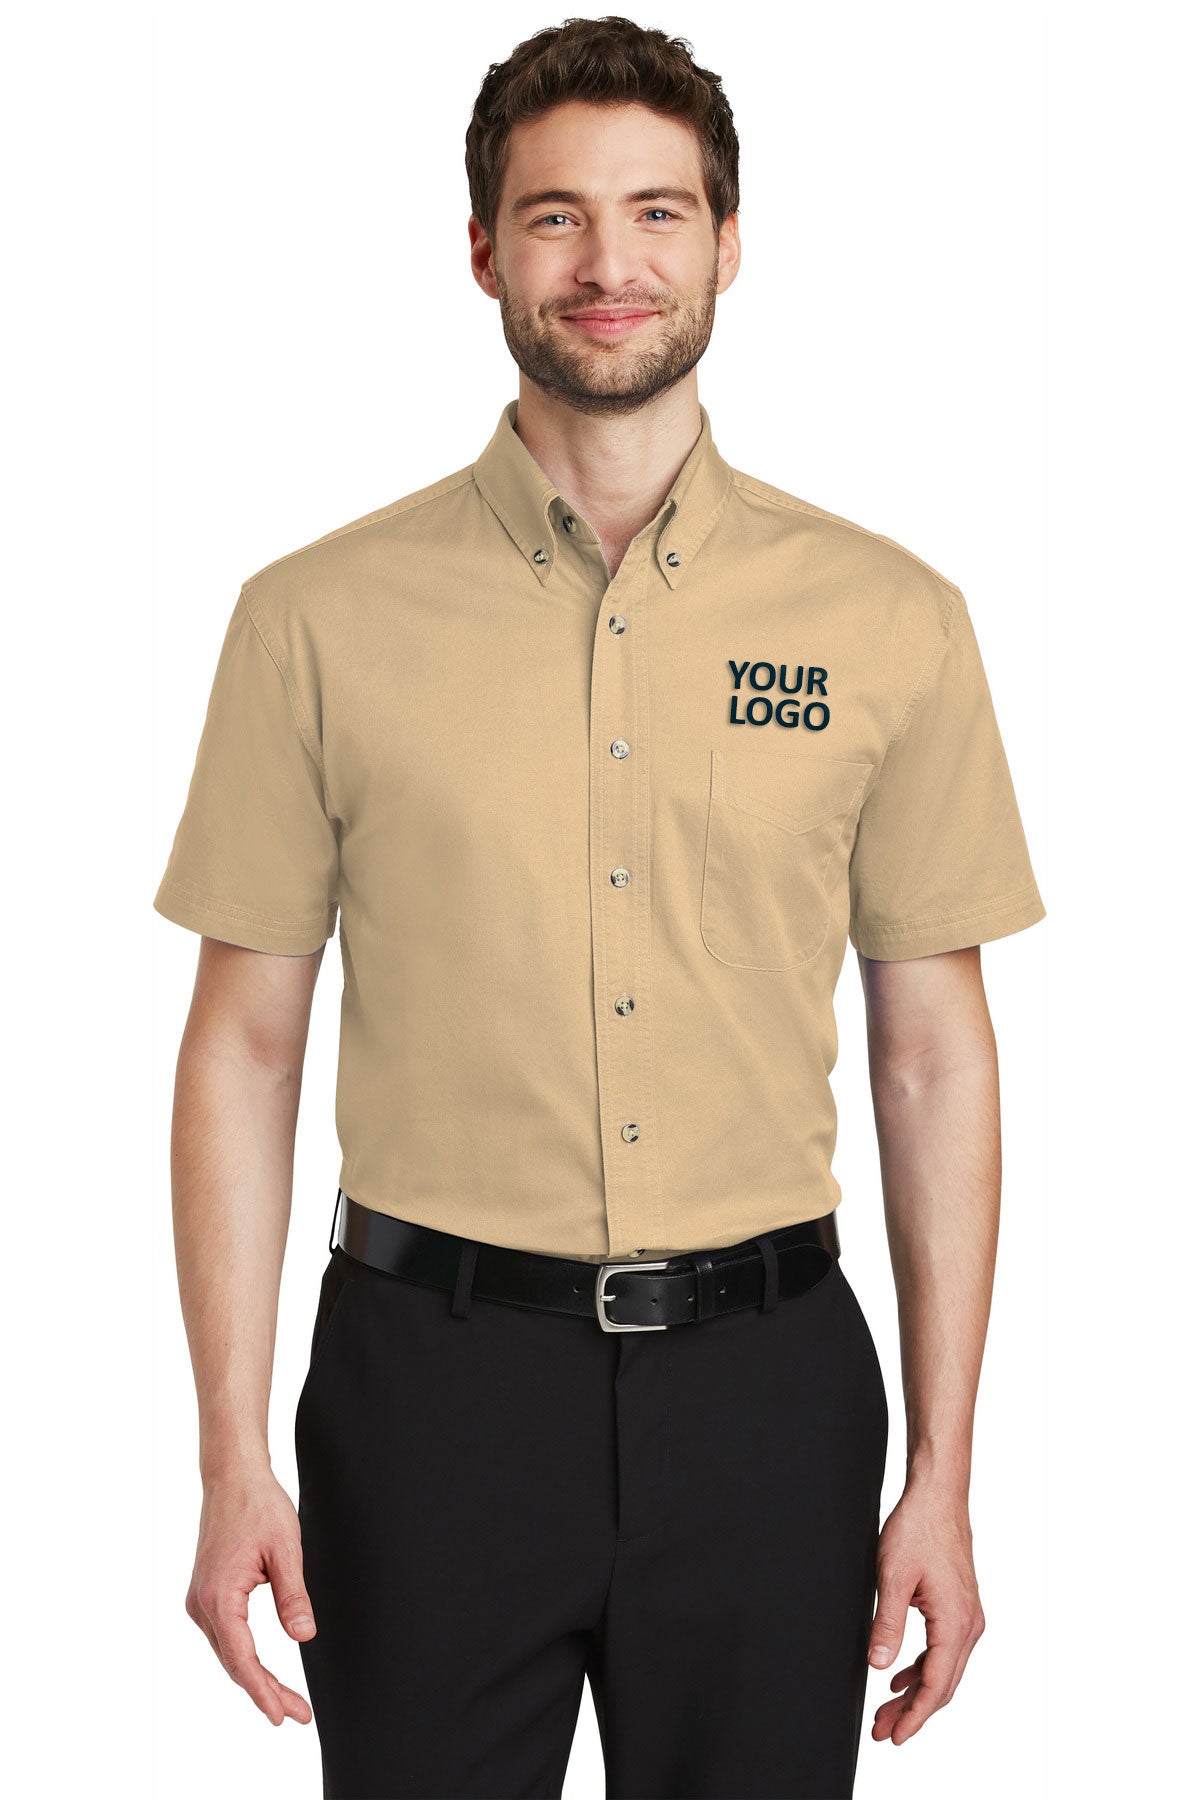 Port Authority Stone S500T custom embroidered shirts